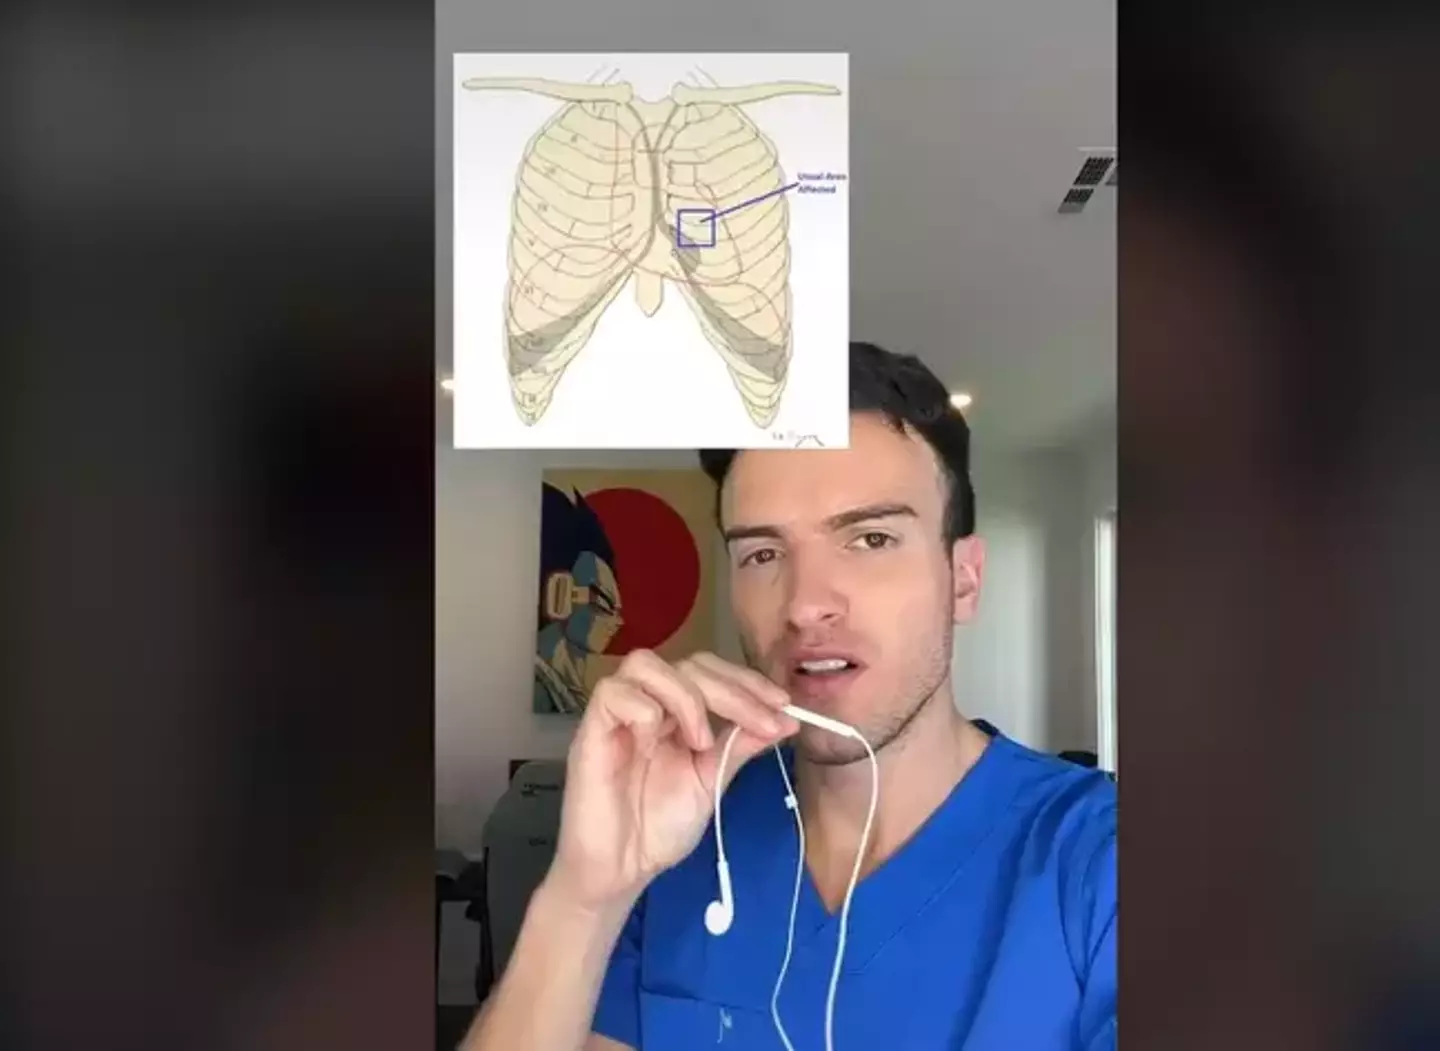 The LA-based emergency medicine physician, who runs the account, has over three million followers on TikTok and millions across other platforms.